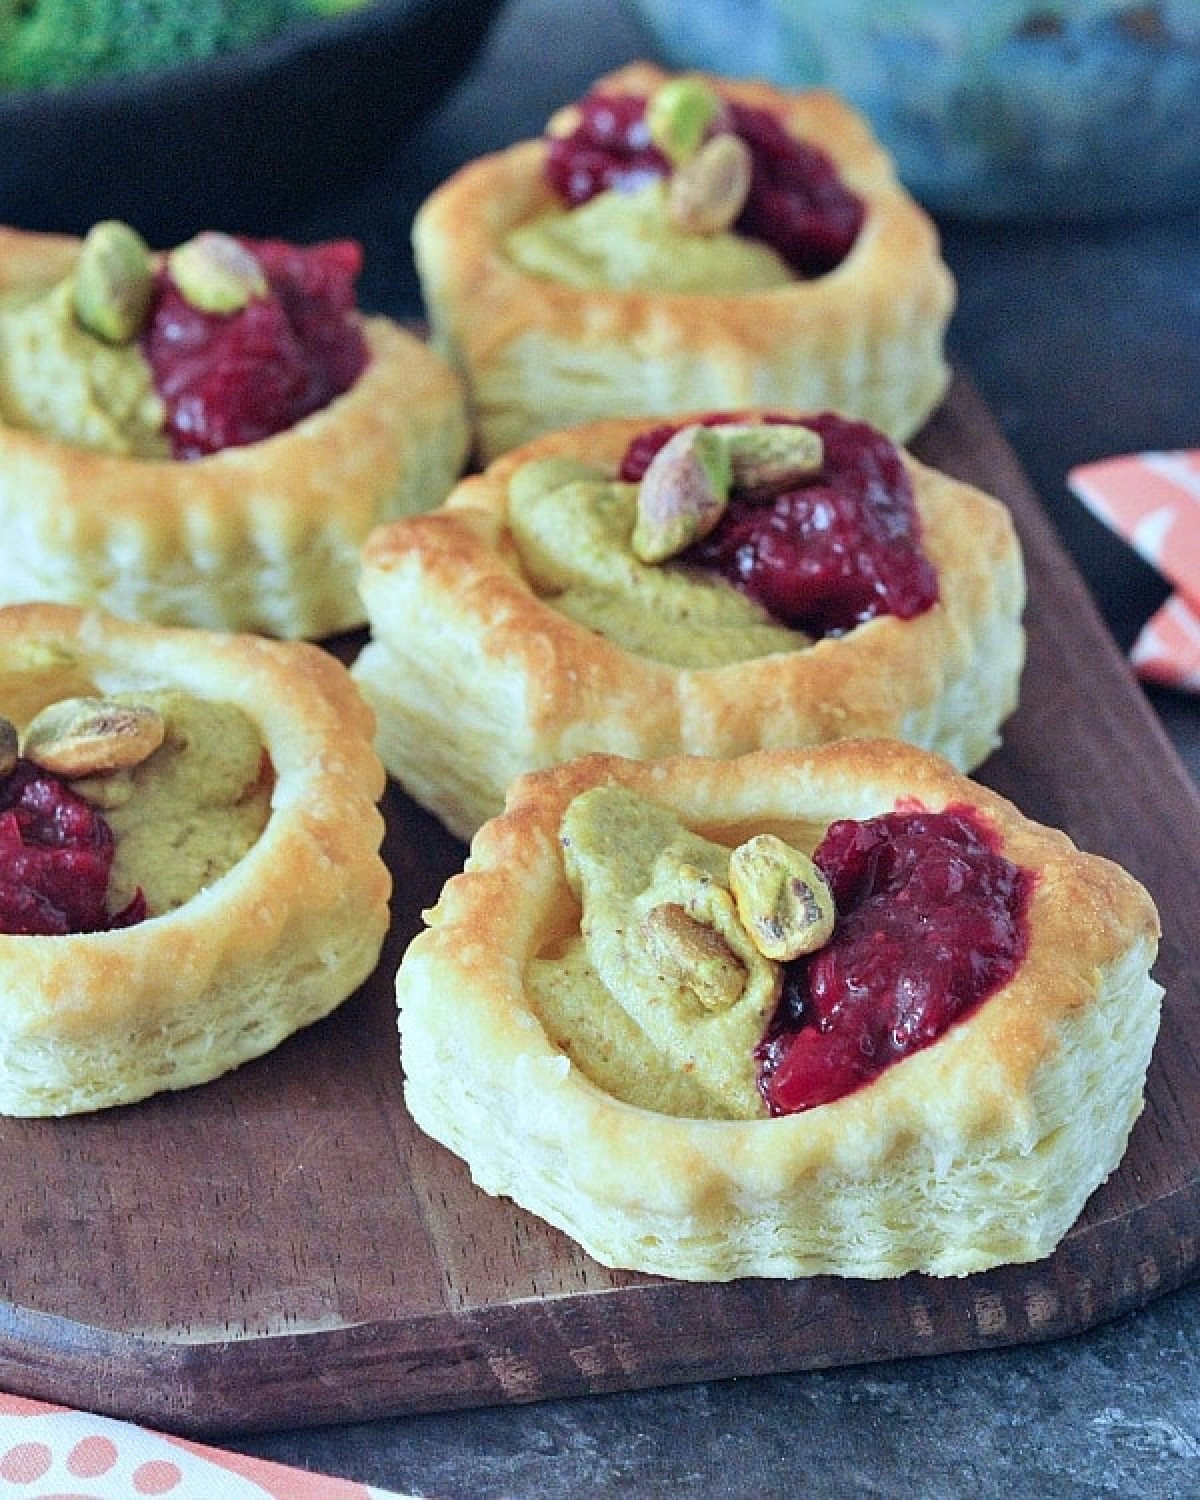 Bright pink and green garlic pistachio cranberry tarts on a wood serving board.